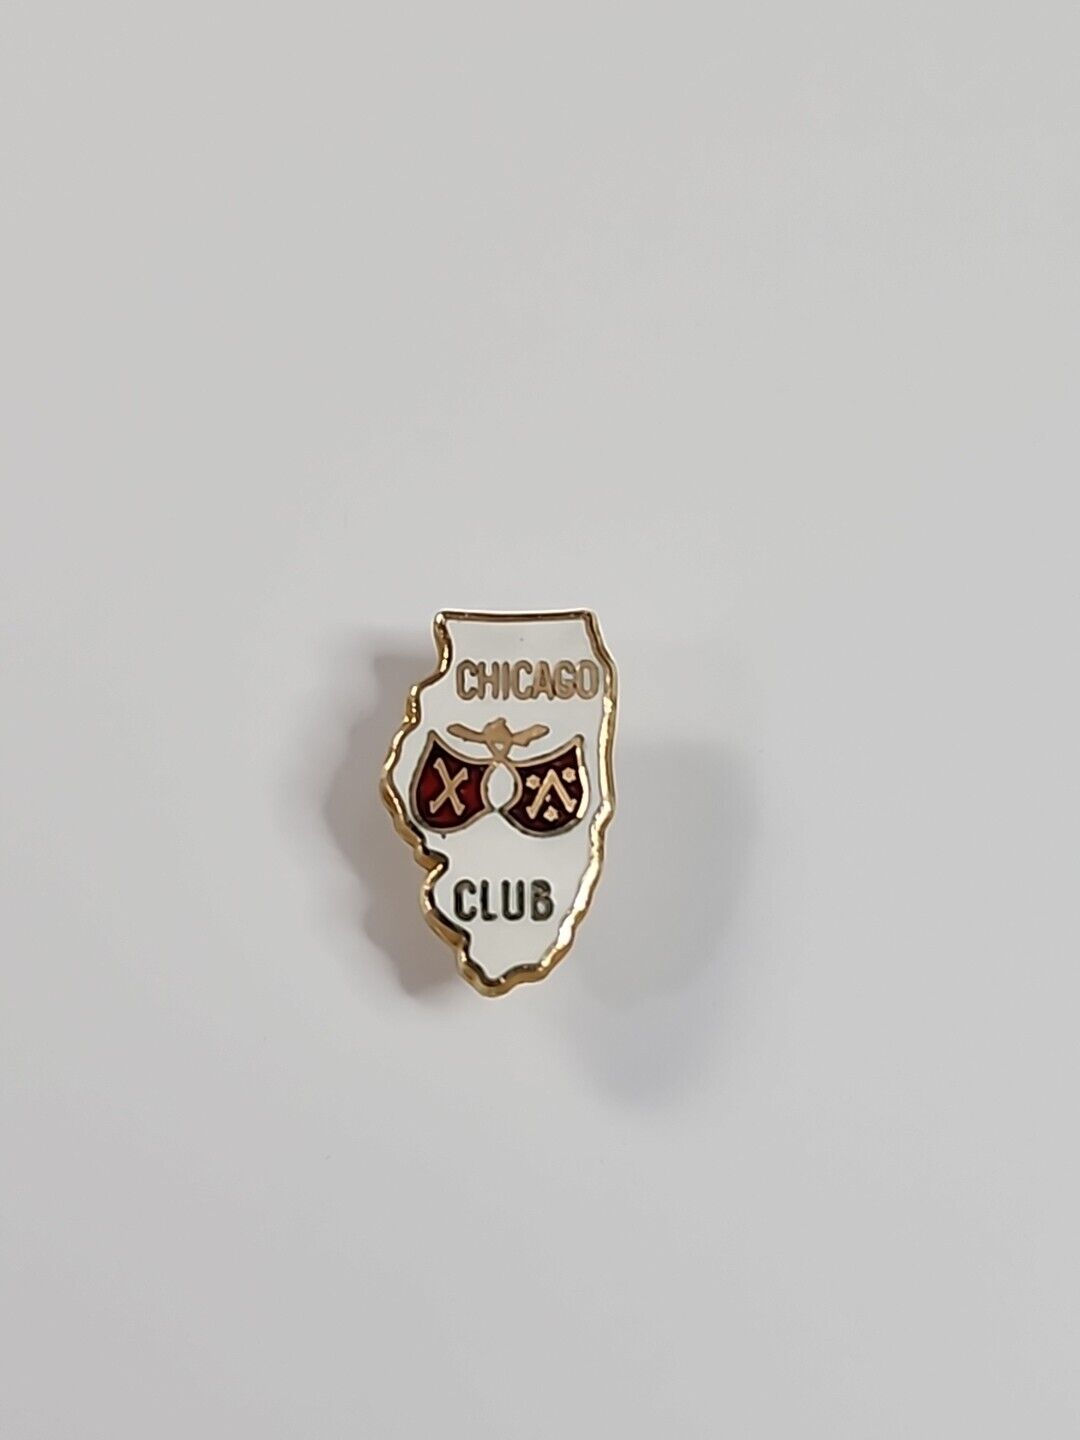 Chicago Club Tie Tack w/ Chain & Bar Members Only Private Club RARE 1/10 10K